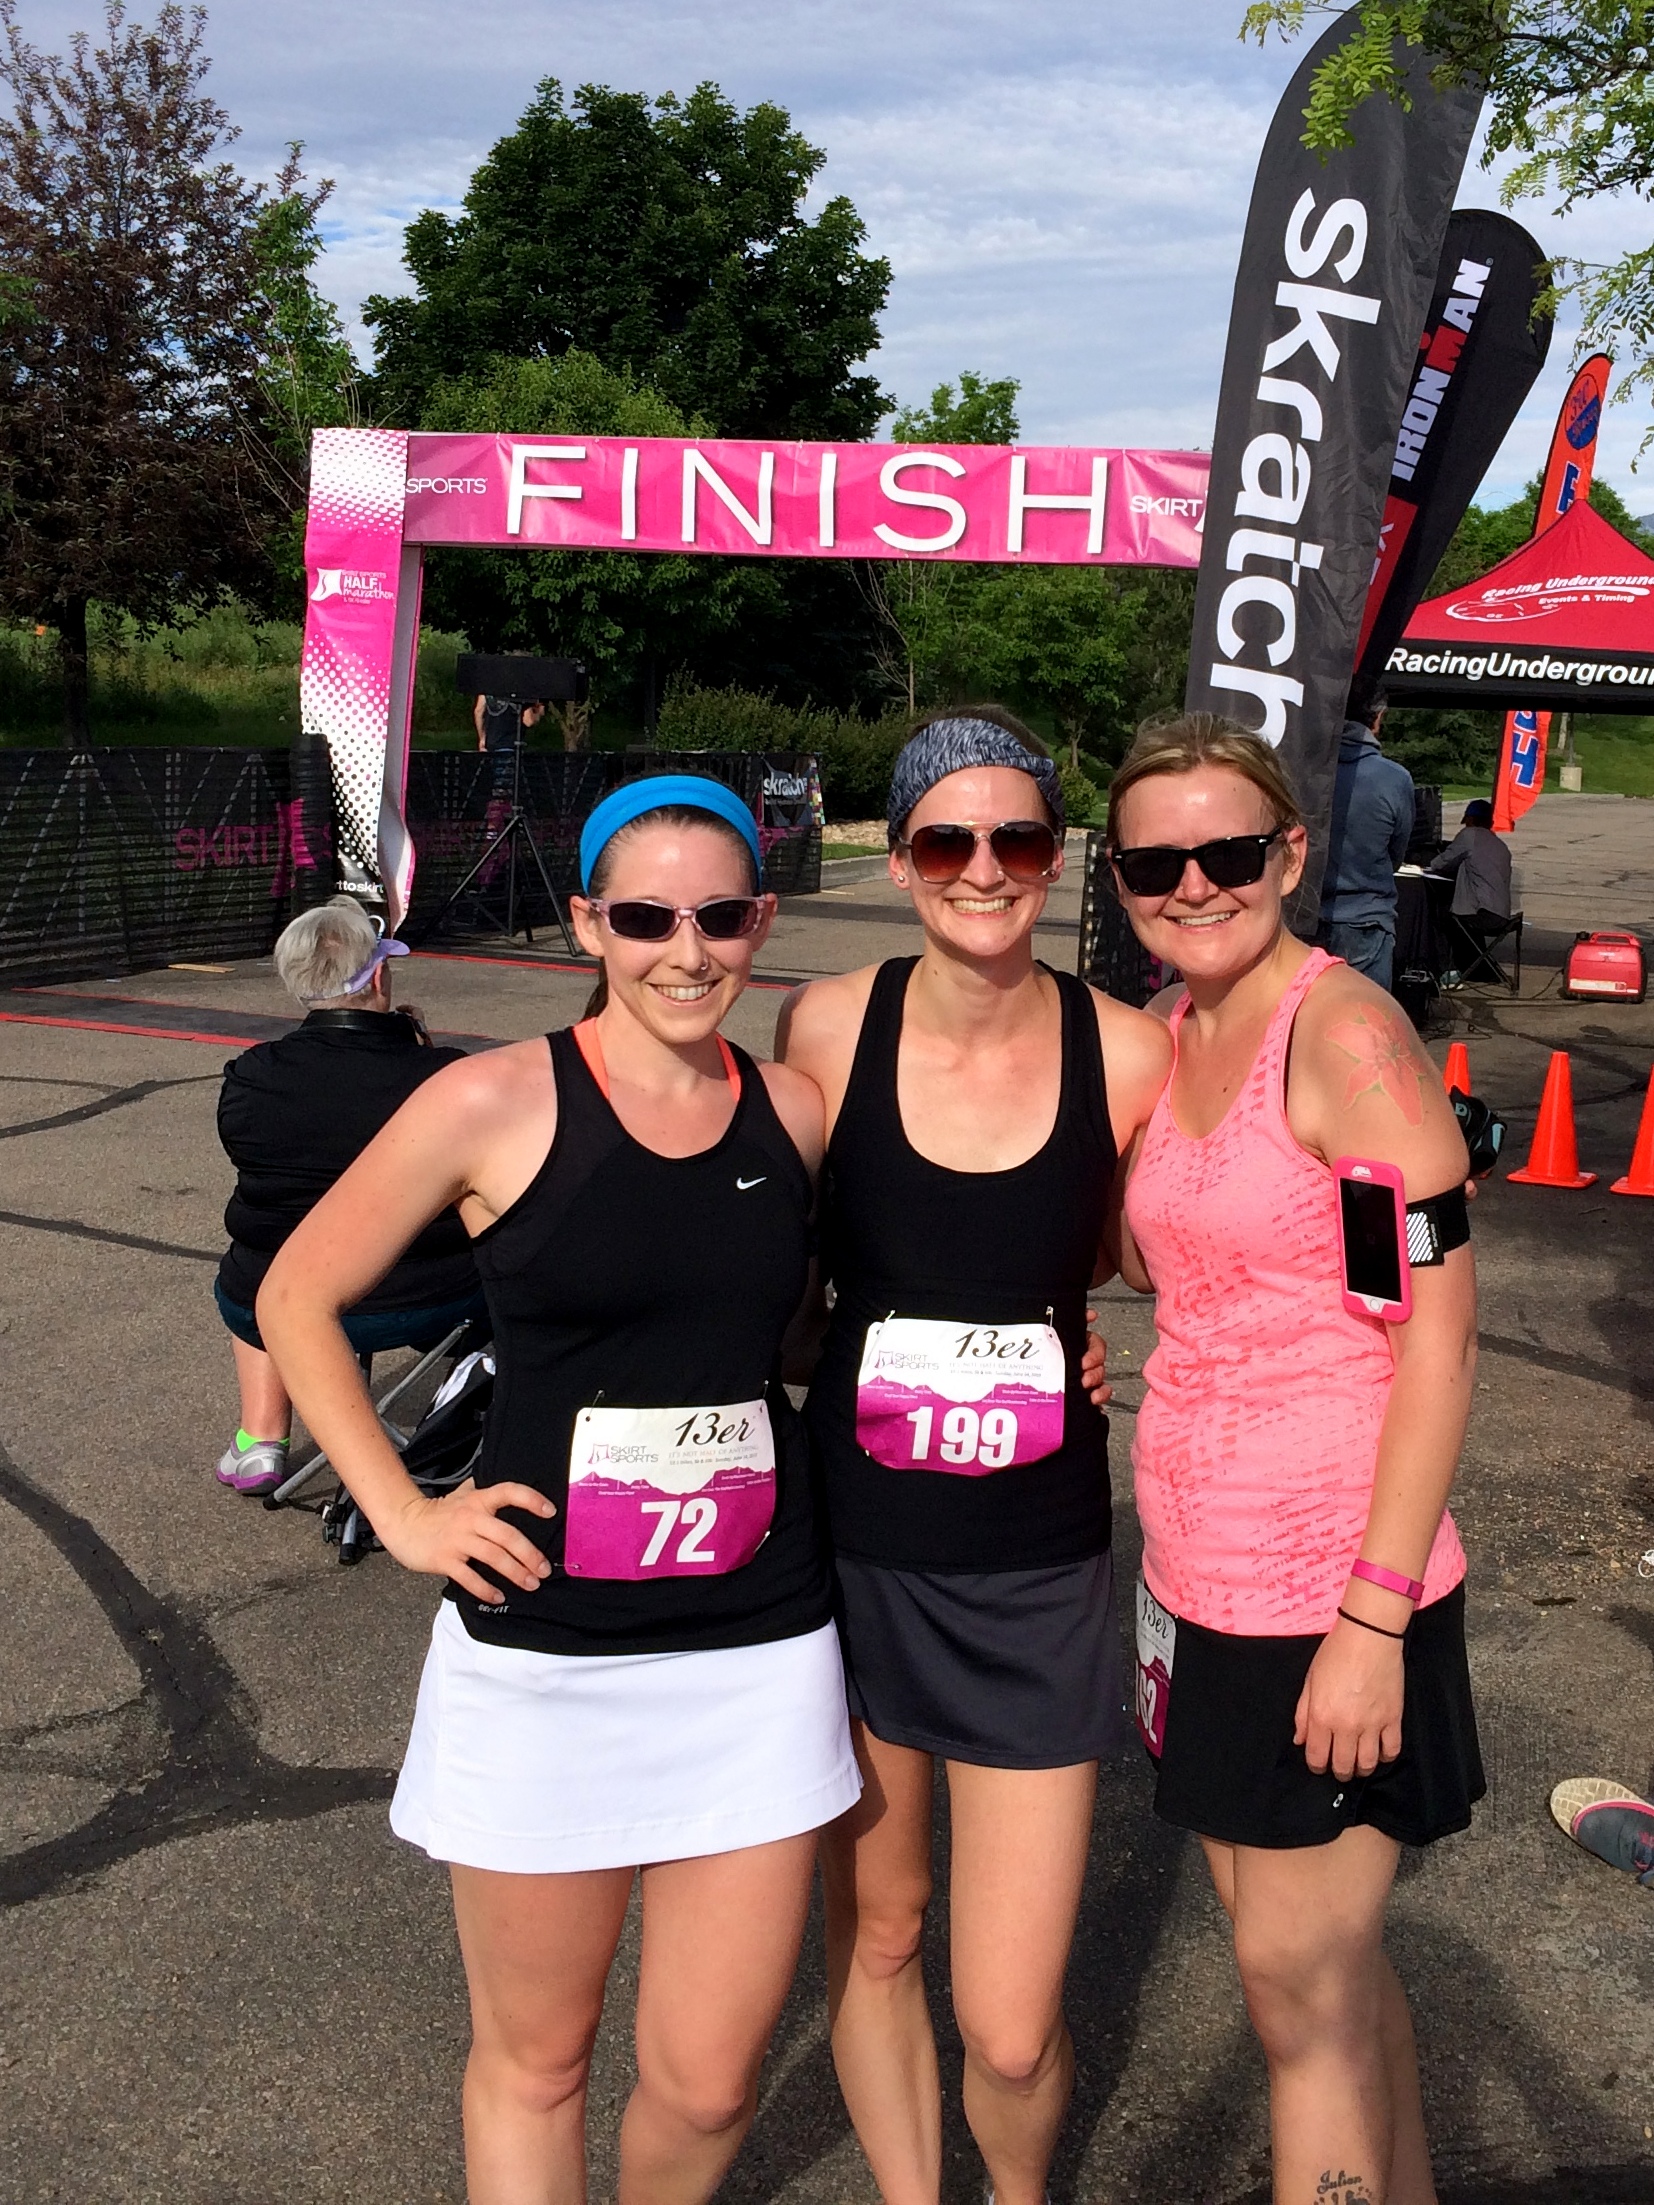 A picture from my longest run yet! Excited to run my first half with these beautiful ladies: Paige, me, and Melanie at the Skirt Sports 10k last summer.